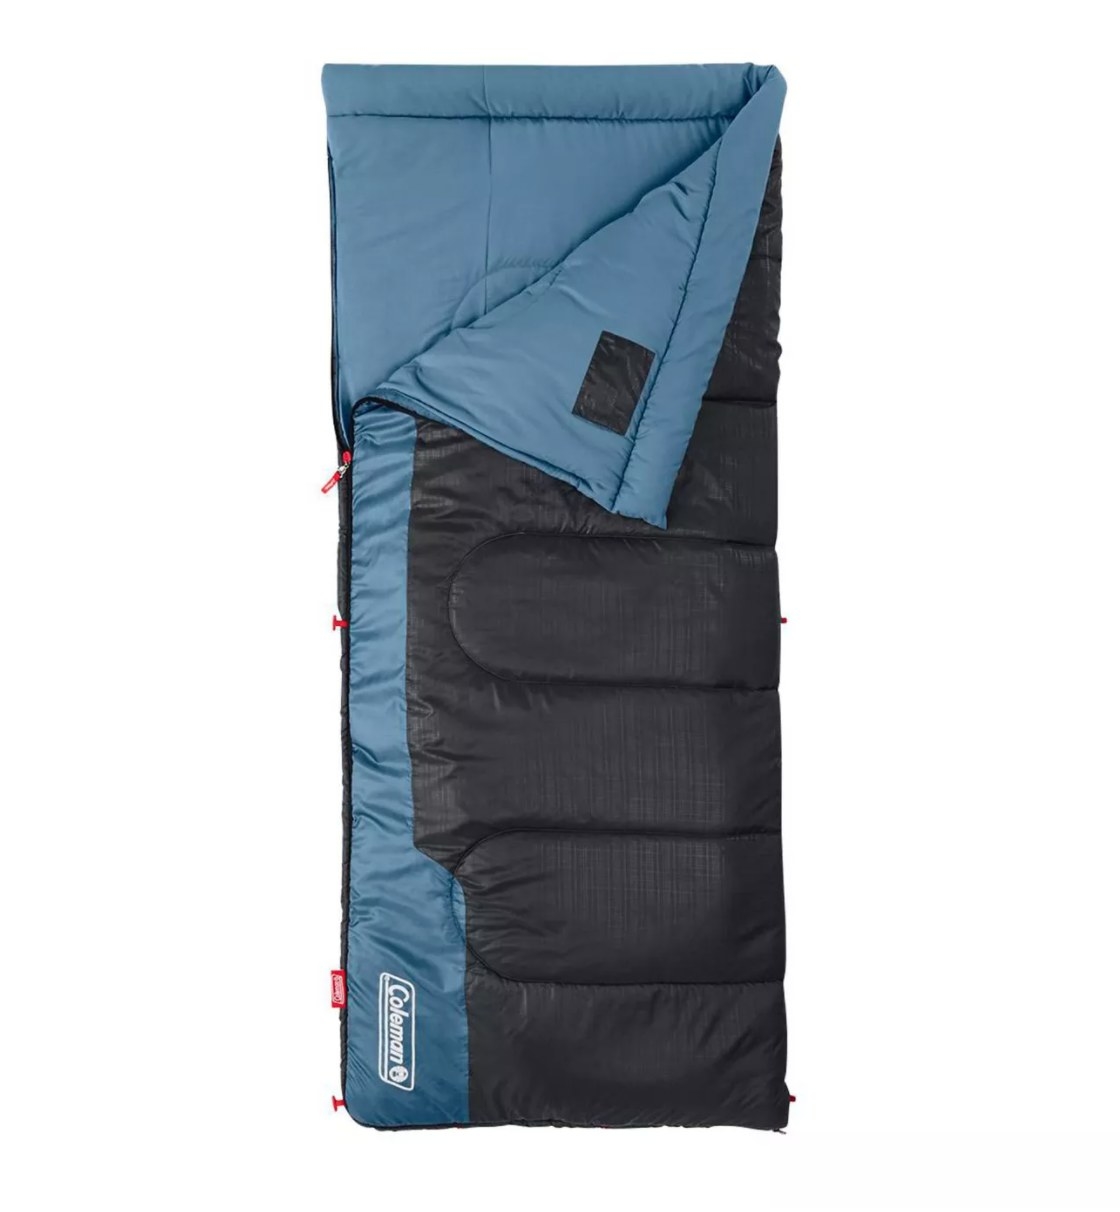 The black and blue Coleman sleeping bag